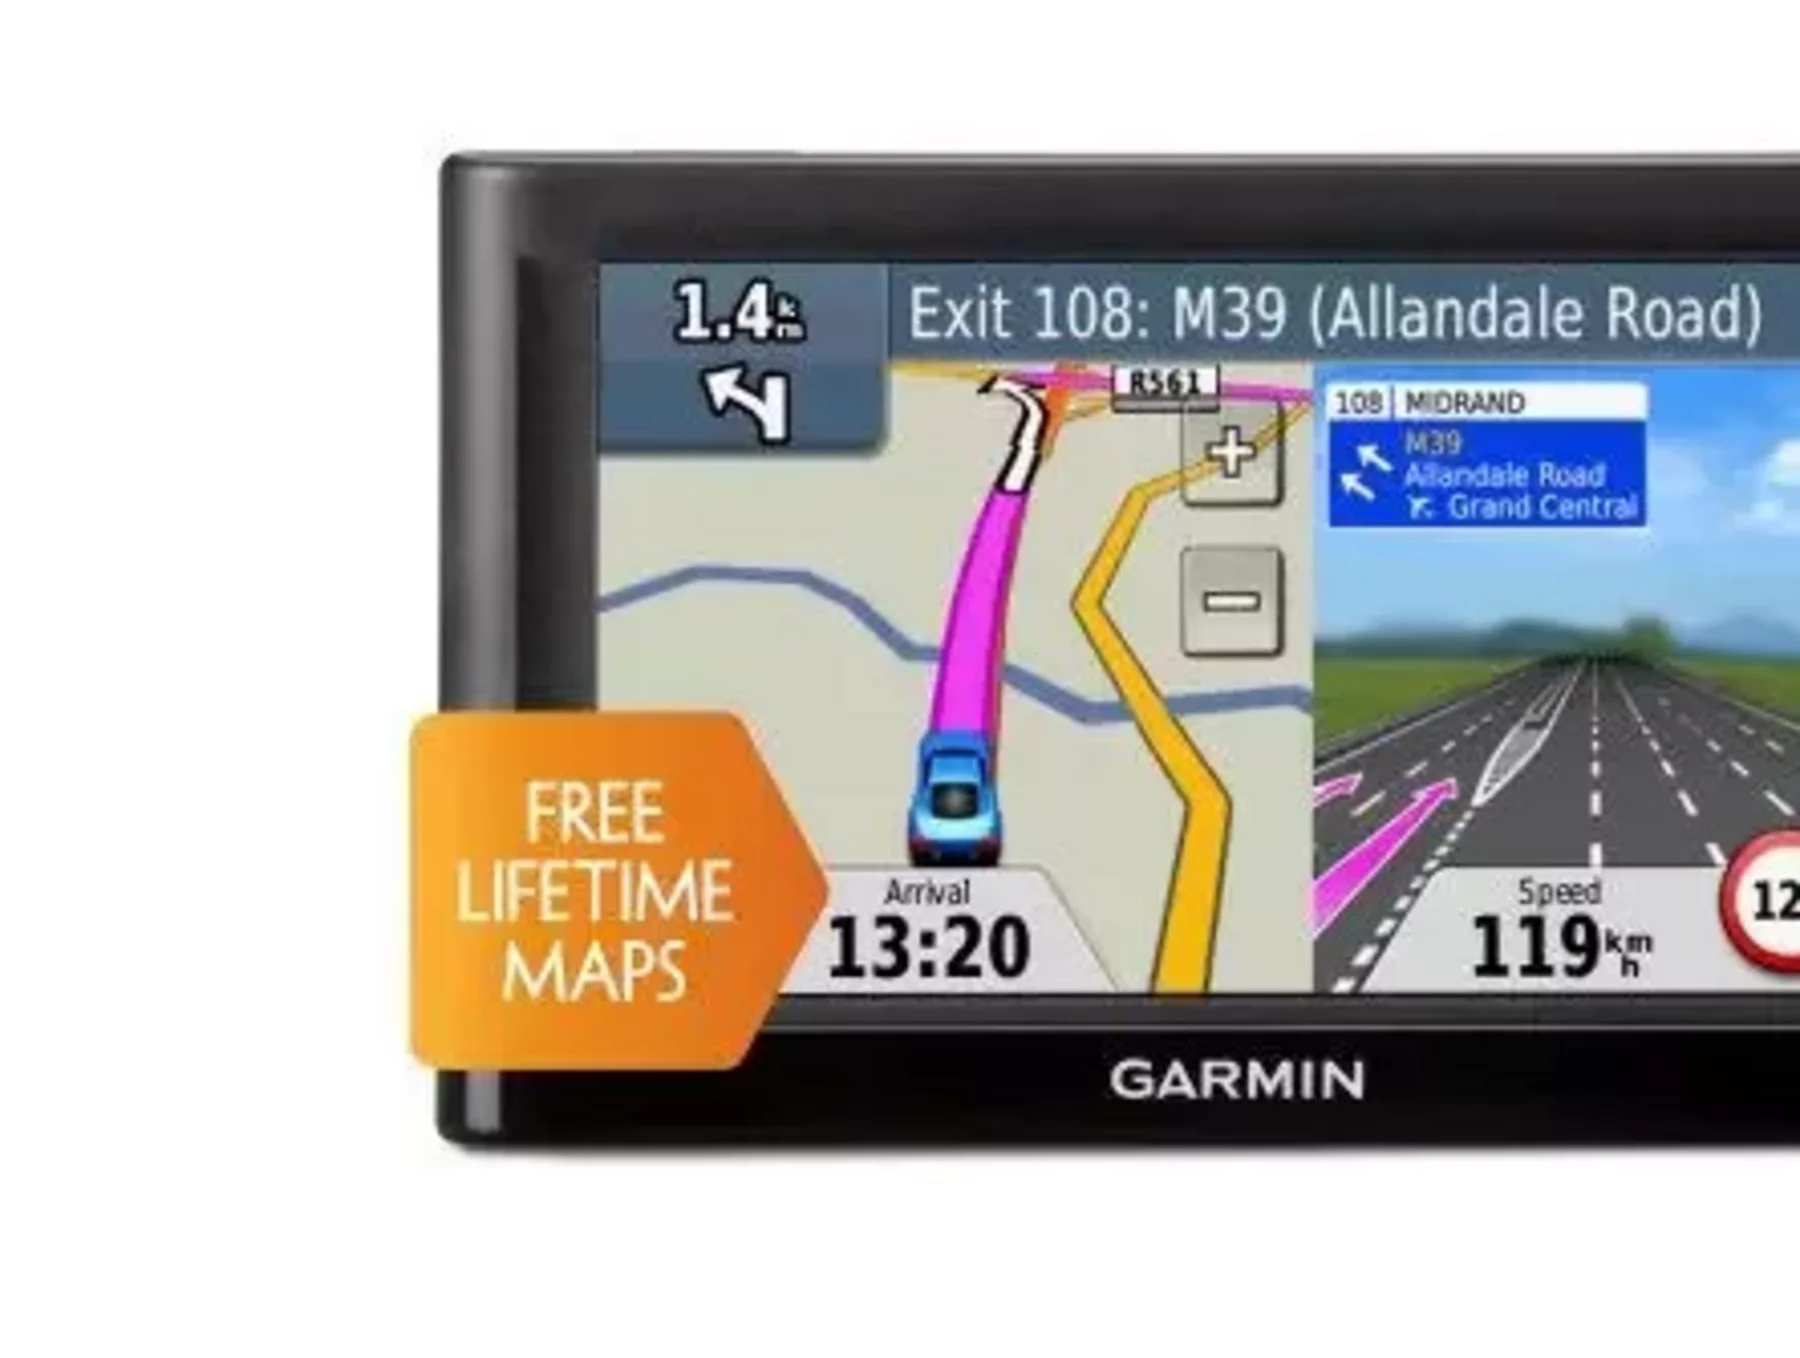 Garmin launches new Essential series in Southern Africa Business Chief EMEA